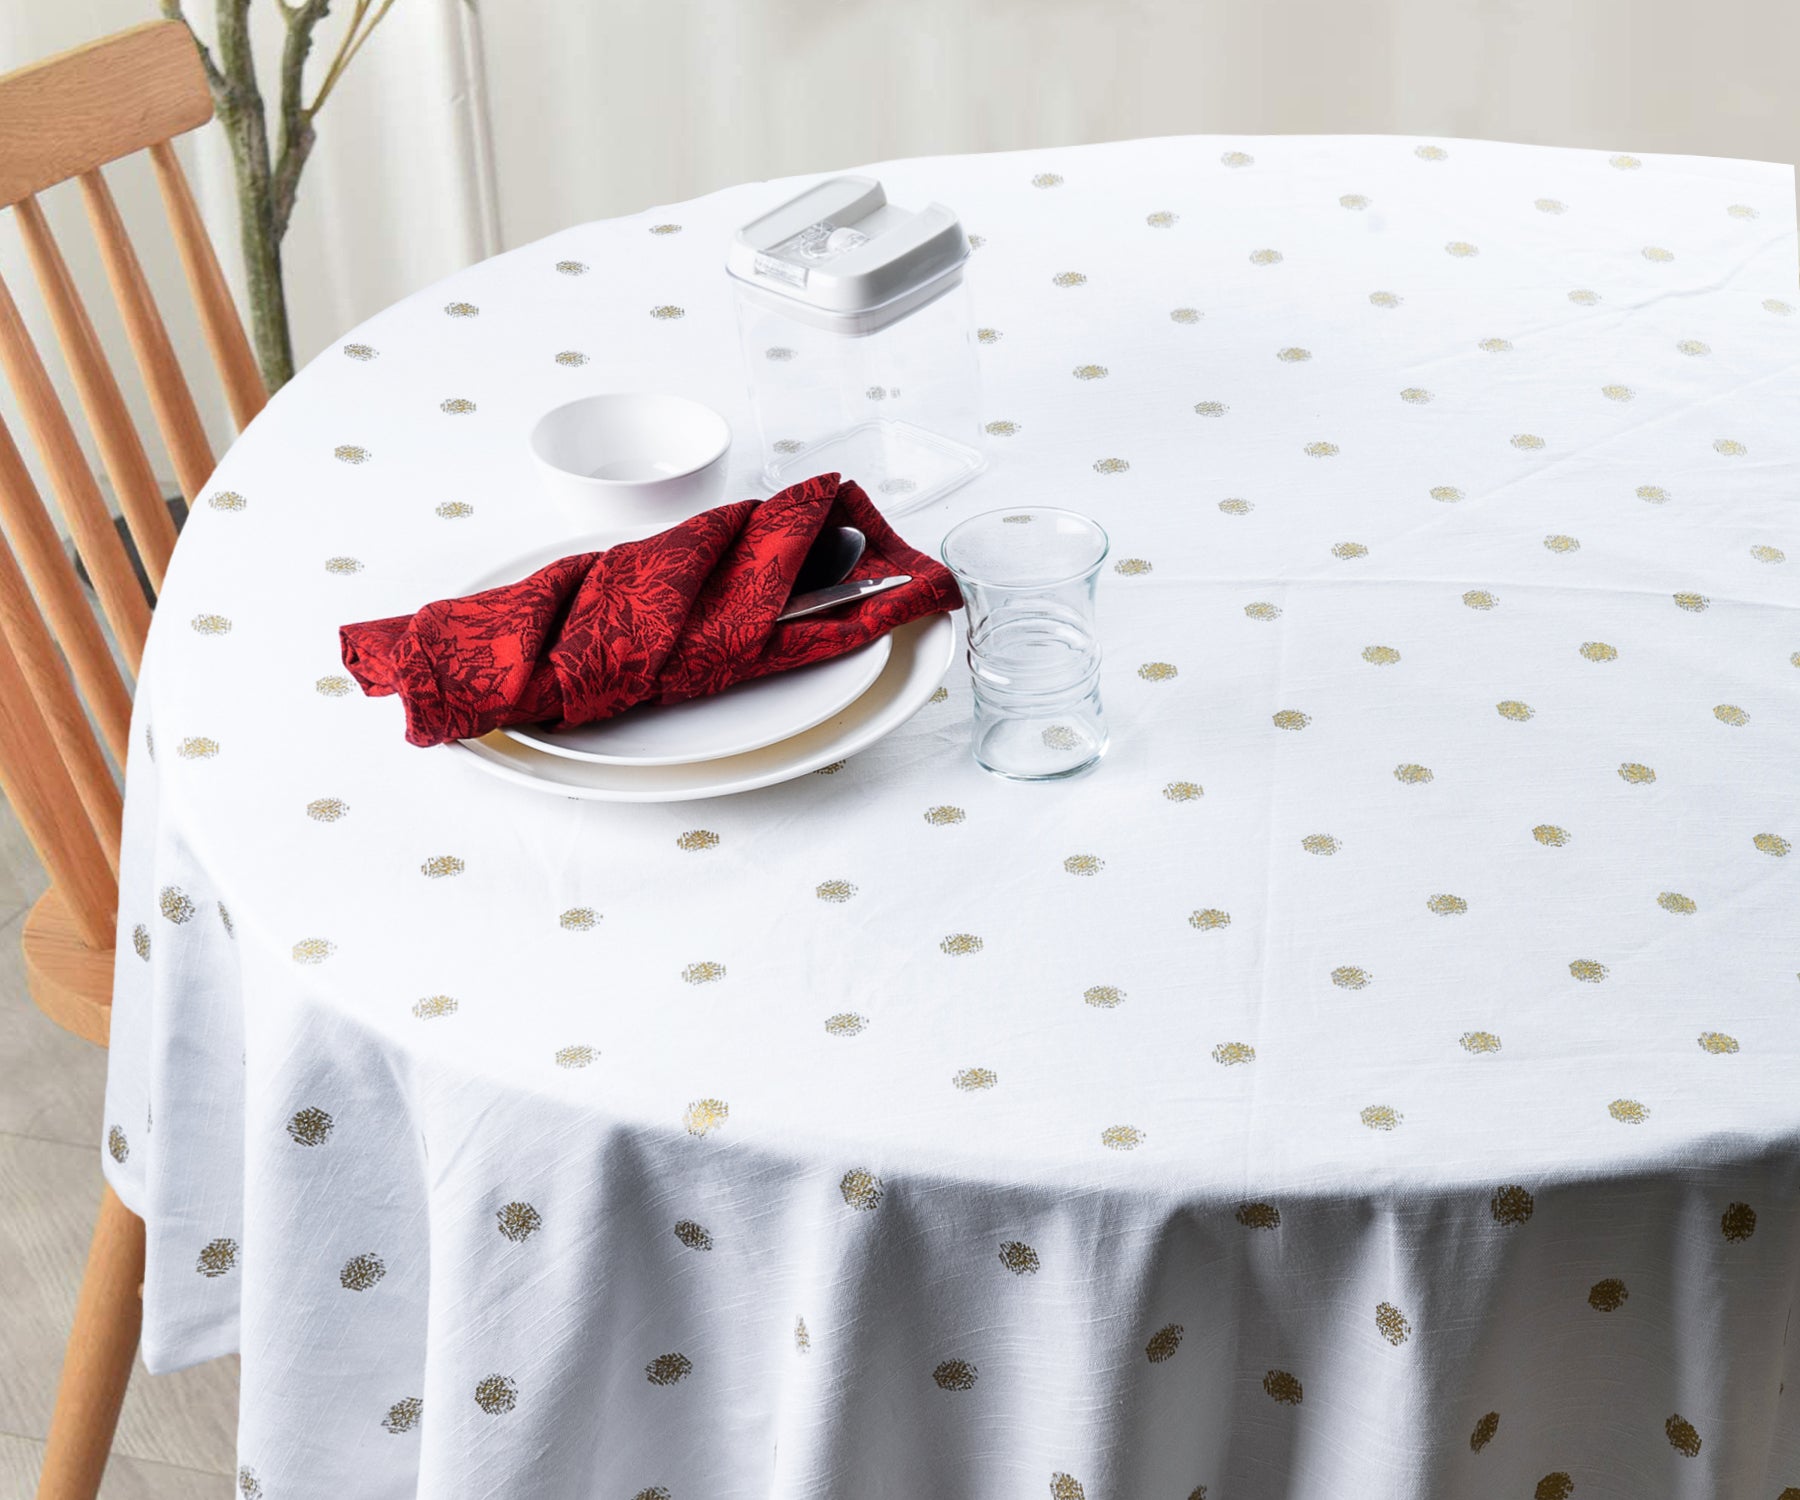 Upgrade your table setting with our round white tablecloth, beautiful cloth tablecloths, and vibrant green selections. Don't forget our durable outdoor tablecloths!